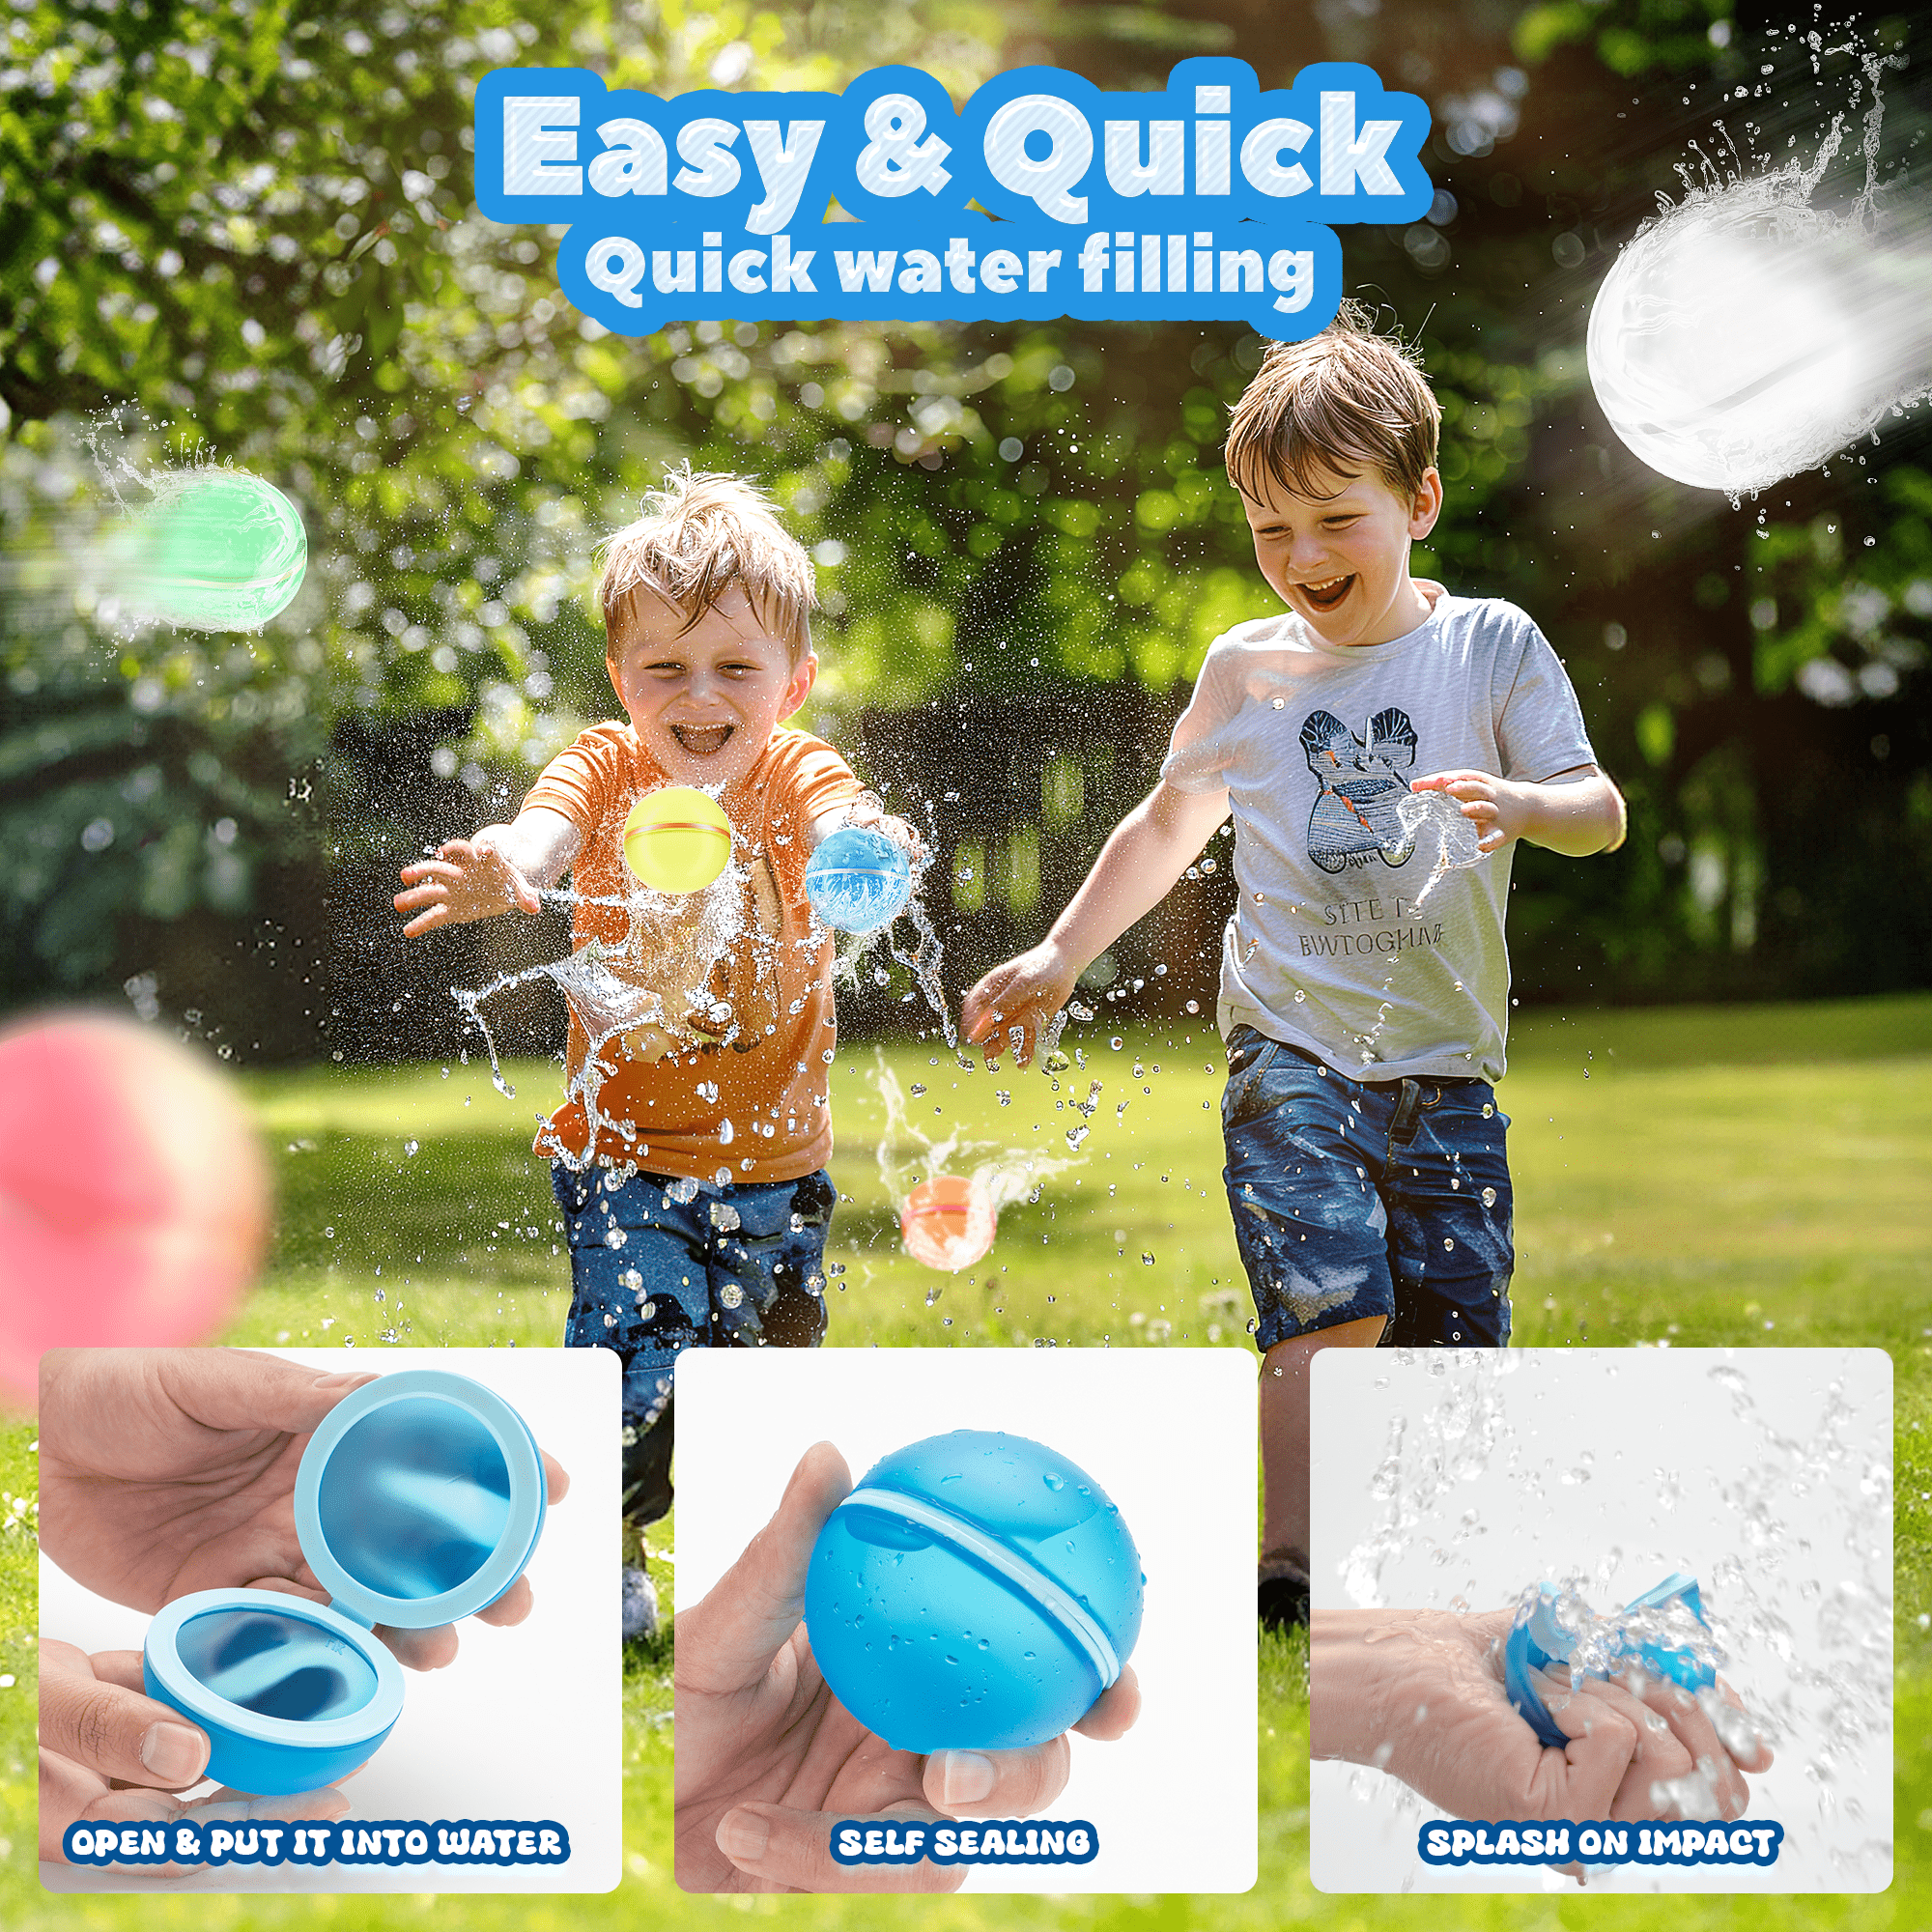 UNEEDE 16 Pcs Reusable Water Balloons, 1500 Times Reusable Splashes Magnetic Water Balloons Quick Fill Water Toys for Boys and Girls, Pool Toys Beach Toys Outdoor Toys, Summer Toy for Outdoor Games